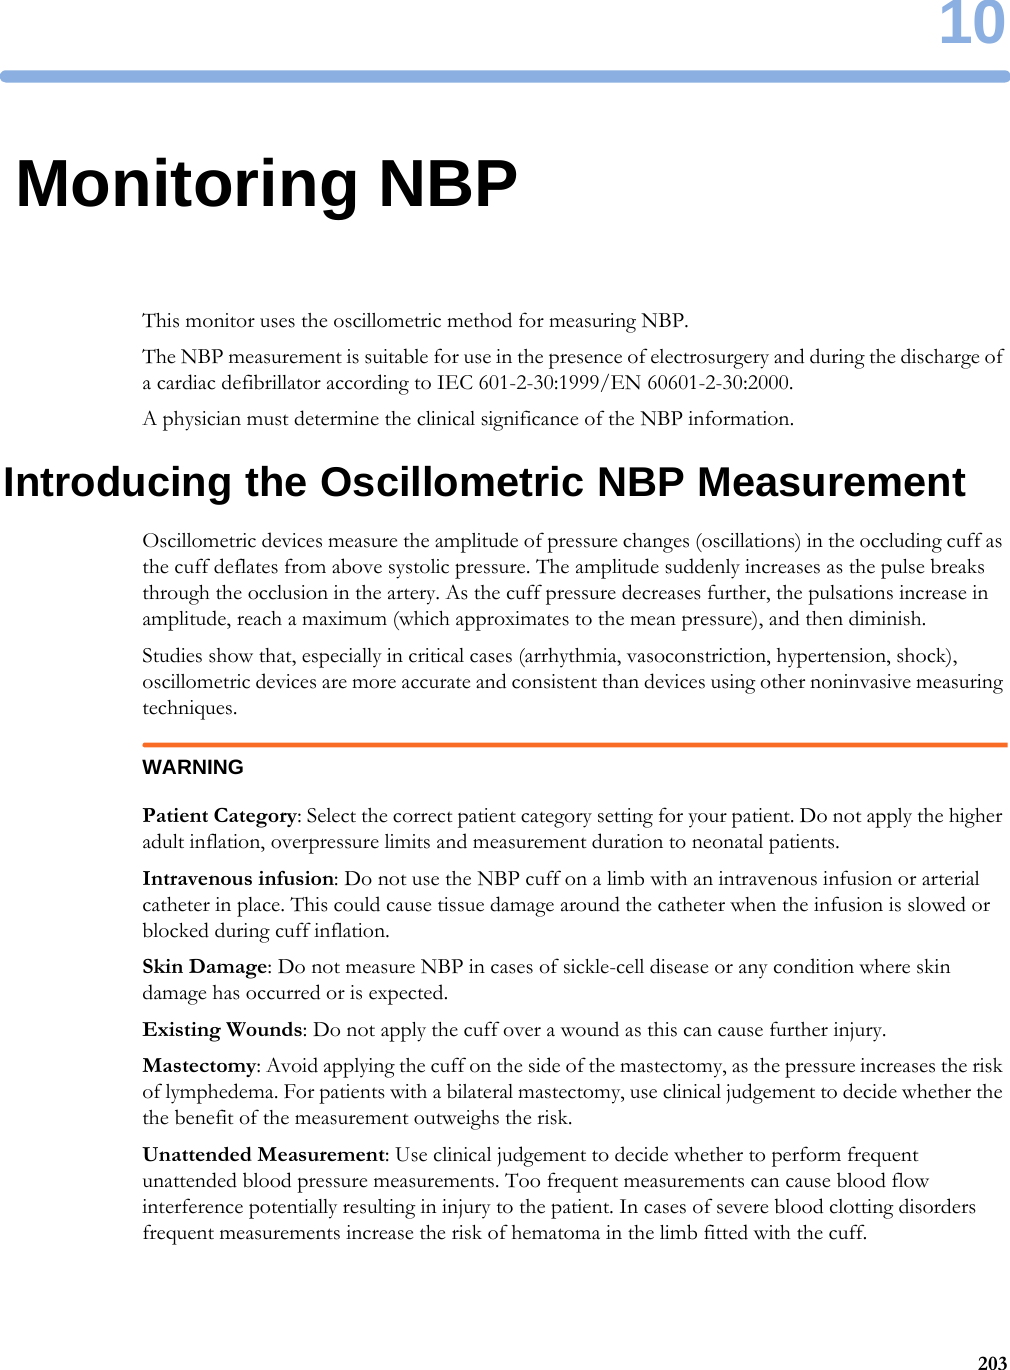 1020310Monitoring NBPThis monitor uses the oscillometric method for measuring NBP.The NBP measurement is suitable for use in the presence of electrosurgery and during the discharge of a cardiac defibrillator according to IEC 601-2-30:1999/EN 60601-2-30:2000.A physician must determine the clinical significance of the NBP information.Introducing the Oscillometric NBP MeasurementOscillometric devices measure the amplitude of pressure changes (oscillations) in the occluding cuff as the cuff deflates from above systolic pressure. The amplitude suddenly increases as the pulse breaks through the occlusion in the artery. As the cuff pressure decreases further, the pulsations increase in amplitude, reach a maximum (which approximates to the mean pressure), and then diminish.Studies show that, especially in critical cases (arrhythmia, vasoconstriction, hypertension, shock), oscillometric devices are more accurate and consistent than devices using other noninvasive measuring techniques.WARNINGPatient Category: Select the correct patient category setting for your patient. Do not apply the higher adult inflation, overpressure limits and measurement duration to neonatal patients.Intravenous infusion: Do not use the NBP cuff on a limb with an intravenous infusion or arterial catheter in place. This could cause tissue damage around the catheter when the infusion is slowed or blocked during cuff inflation.Skin Damage: Do not measure NBP in cases of sickle-cell disease or any condition where skin damage has occurred or is expected.Existing Wounds: Do not apply the cuff over a wound as this can cause further injury.Mastectomy: Avoid applying the cuff on the side of the mastectomy, as the pressure increases the risk of lymphedema. For patients with a bilateral mastectomy, use clinical judgement to decide whether the the benefit of the measurement outweighs the risk.Unattended Measurement: Use clinical judgement to decide whether to perform frequent unattended blood pressure measurements. Too frequent measurements can cause blood flow interference potentially resulting in injury to the patient. In cases of severe blood clotting disorders frequent measurements increase the risk of hematoma in the limb fitted with the cuff.